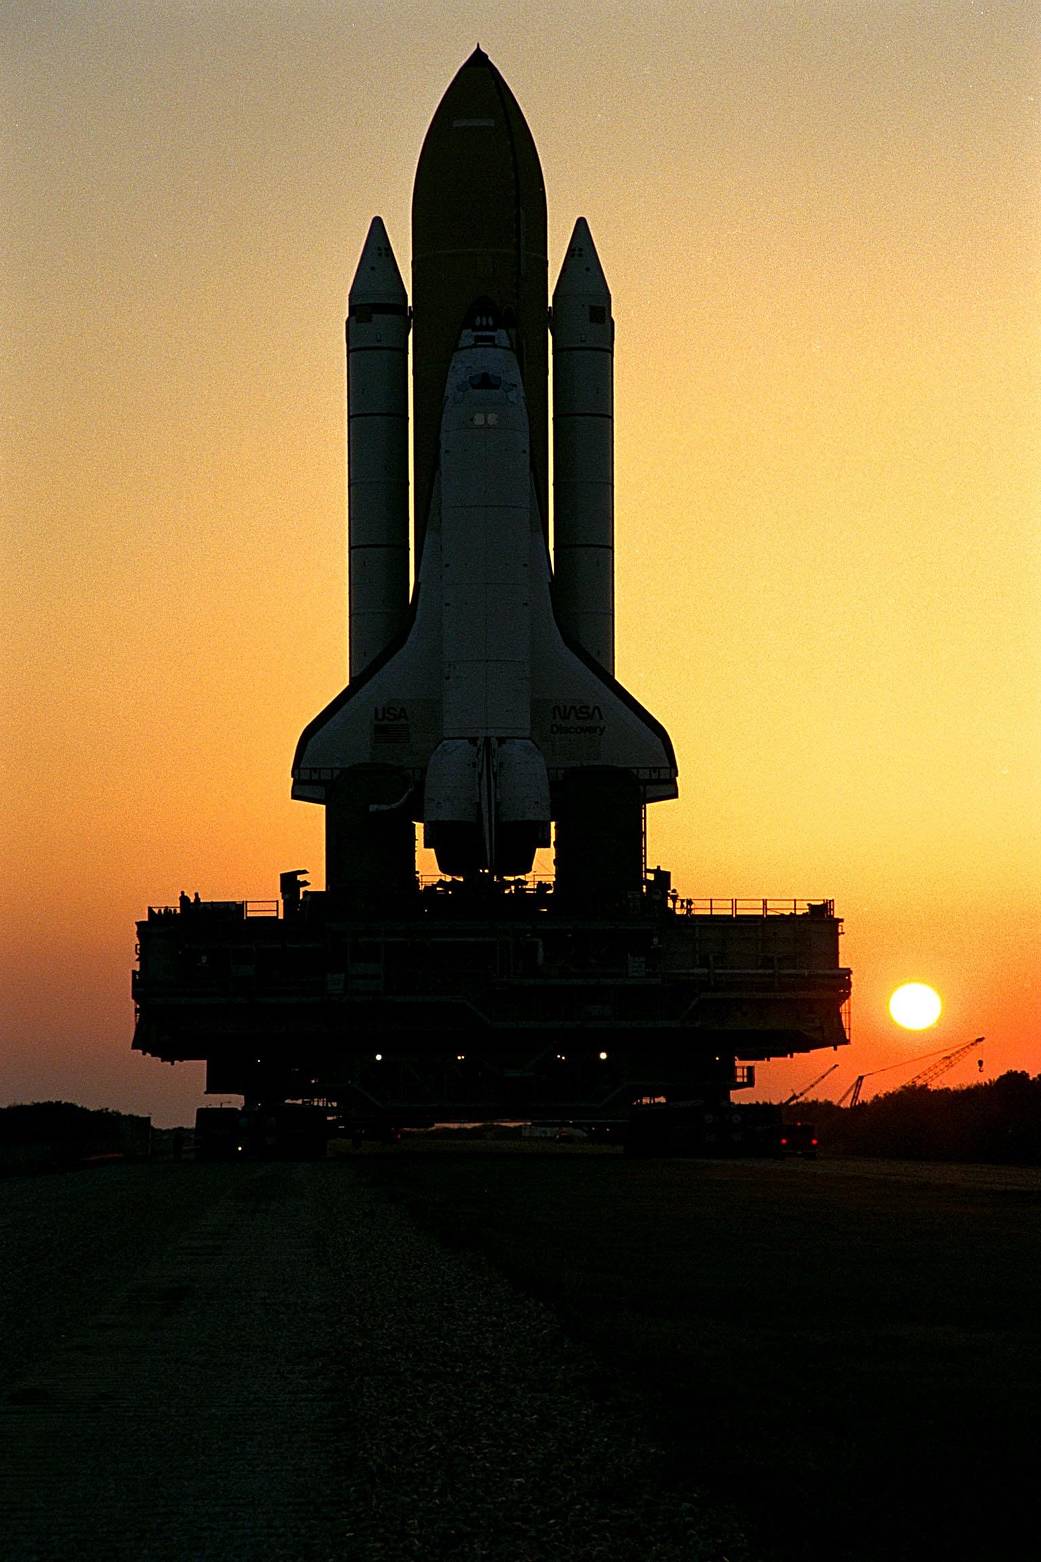 This week in 1998, the shuttle Discovery and STS-91 launched from Kennedy Space Center on the final Shuttle-Mir docking mission.